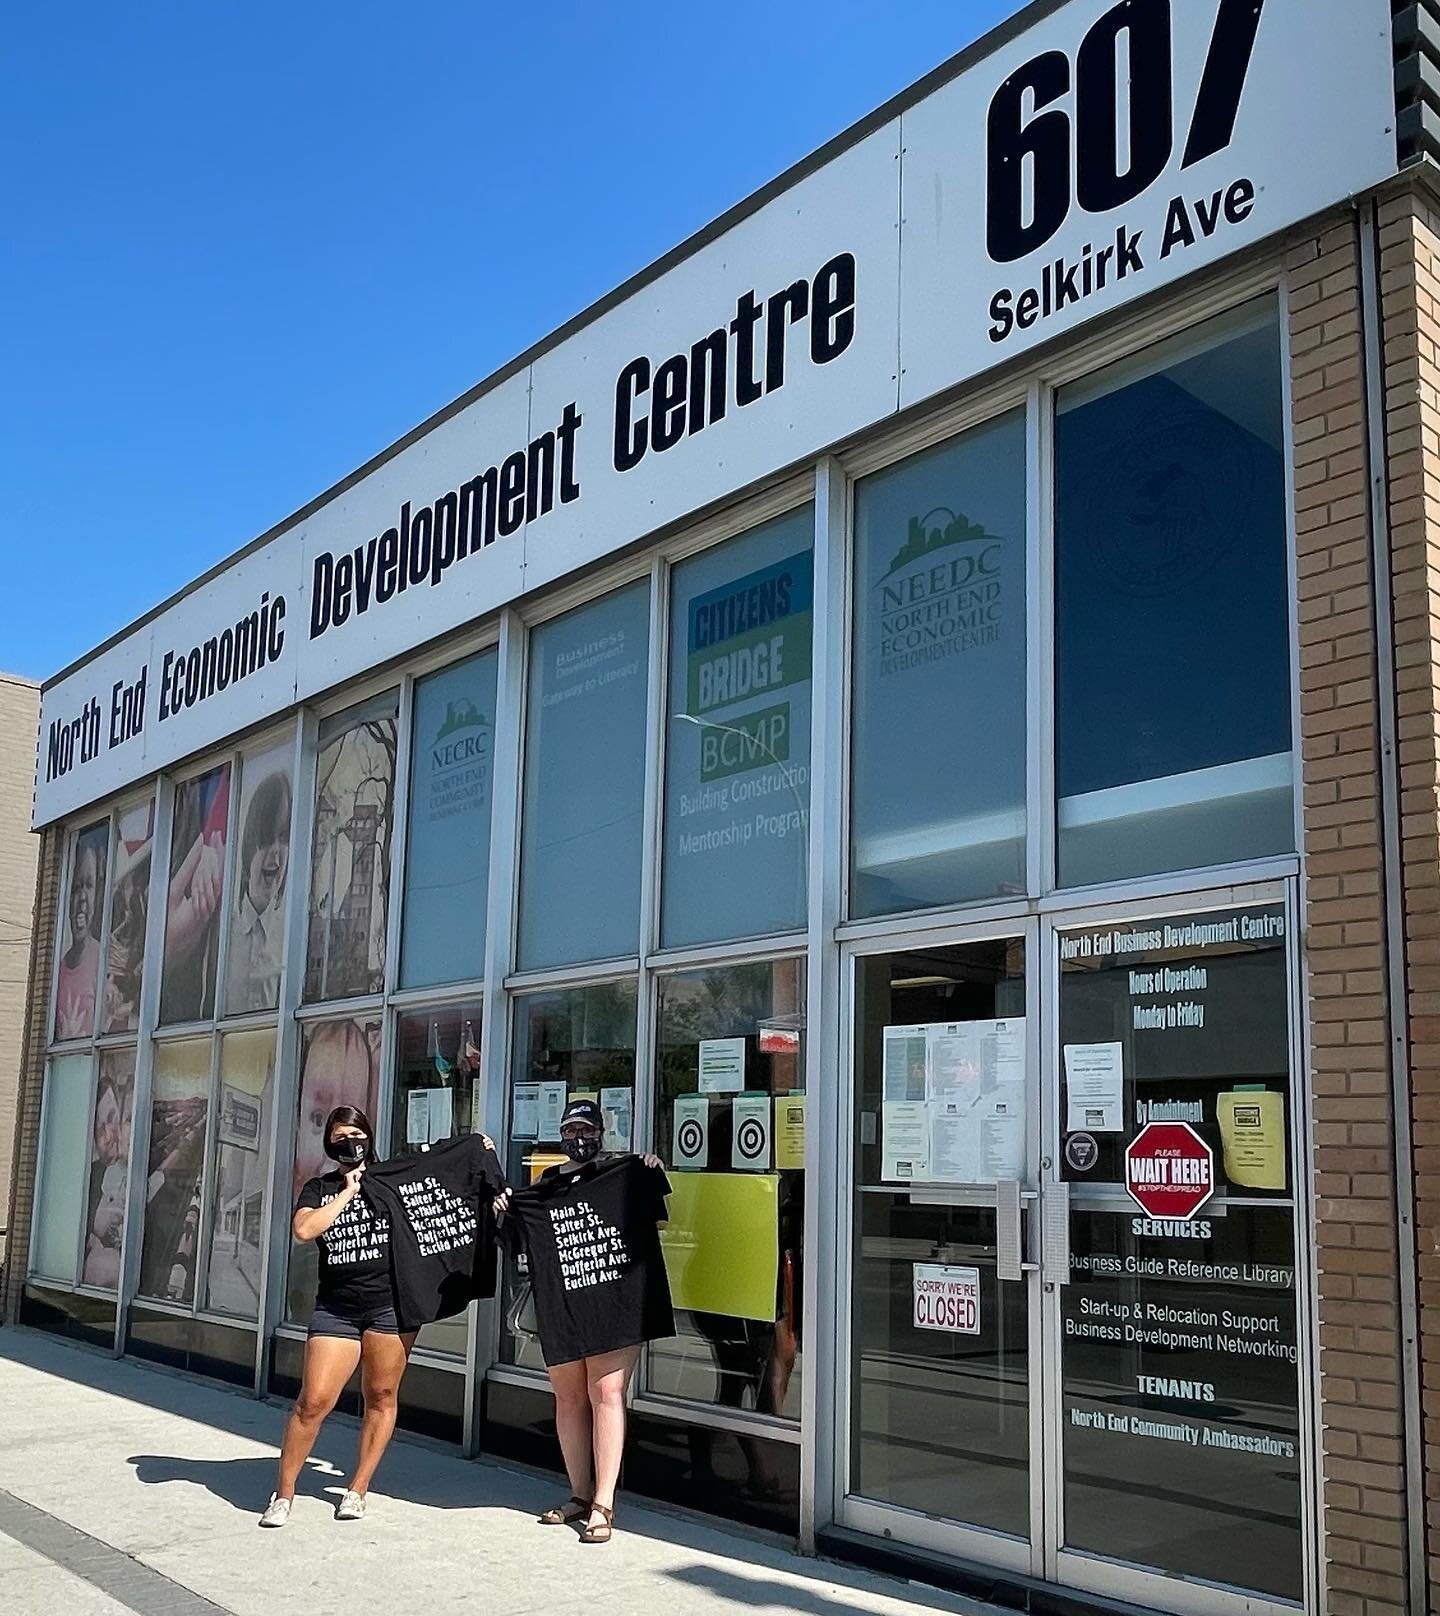 HAPPENING NOW!

Community clean up now and BBQ at 1 PM!

Come by 607 Selkirk Ave and participate in the community clean up and get some lunch from @necrc  gloves and garbage bags are provided. 

They are doing a draw at 1 PM for gift cards and IVNE g